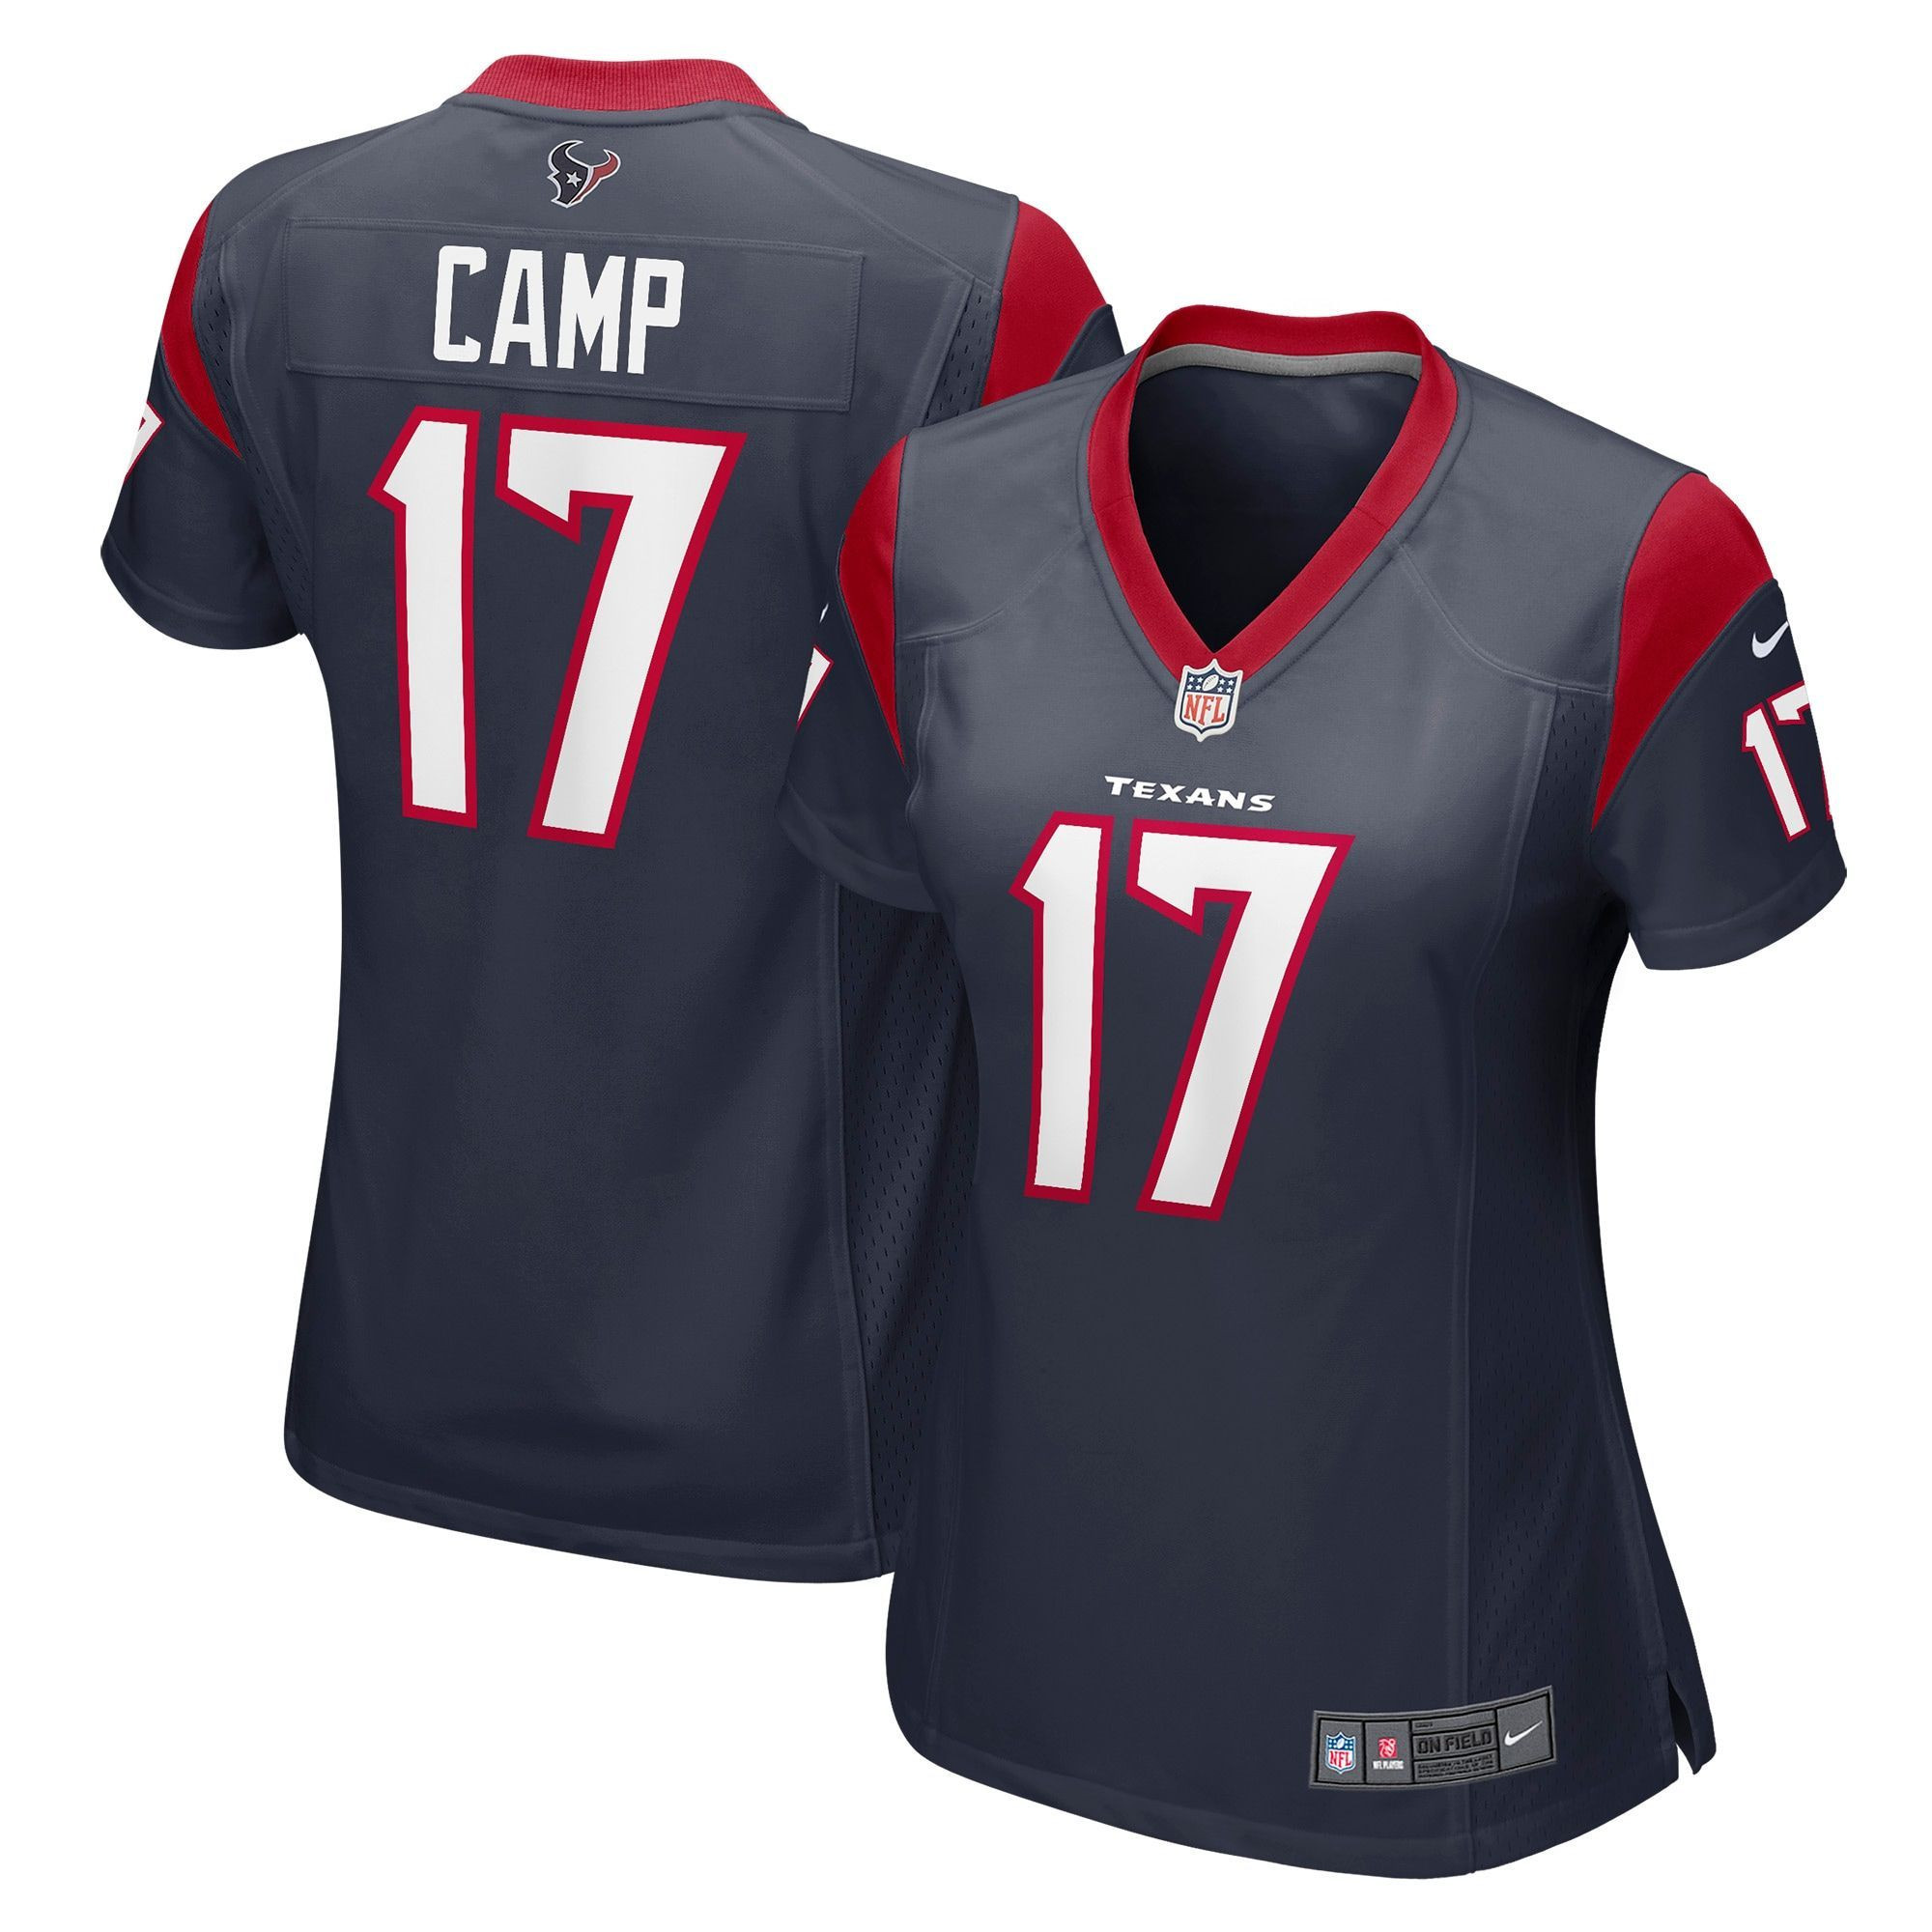 Womens Houston Texans Jalen Camp Navy Game Player Jersey Gift for Houston Texans fans